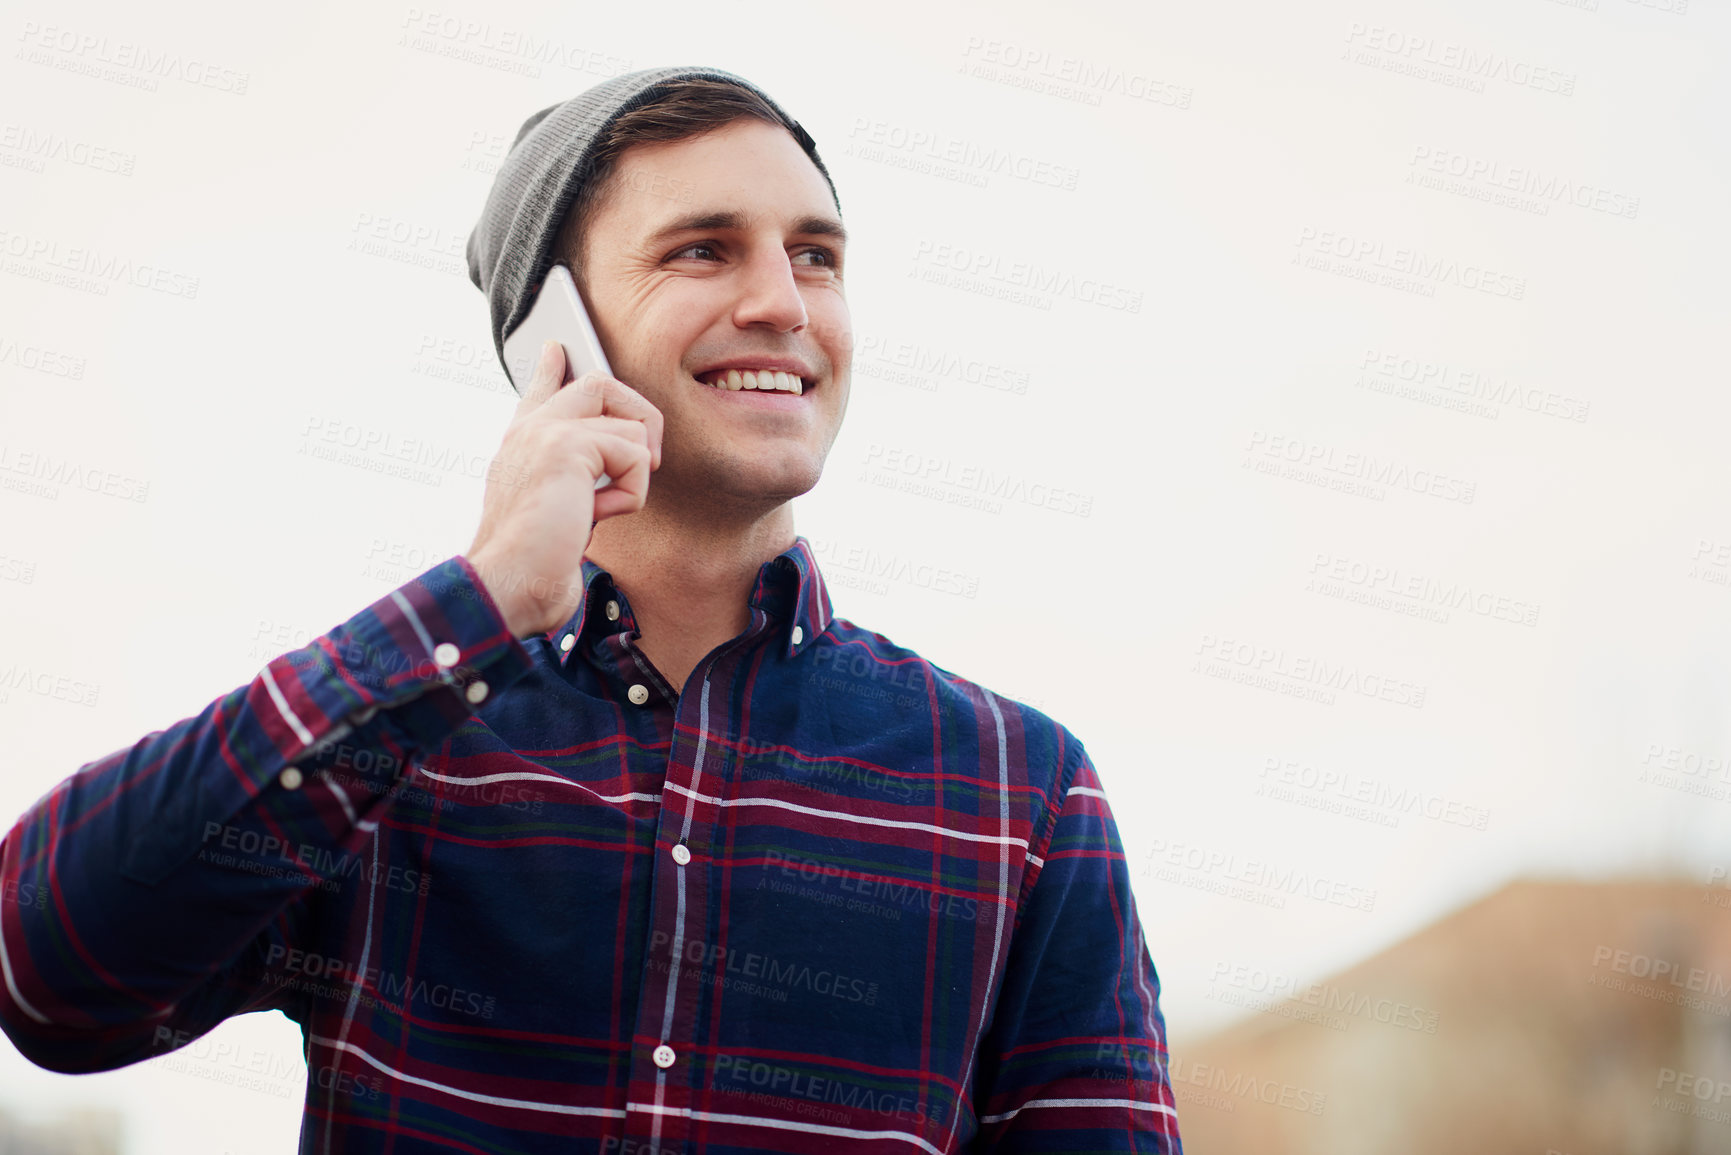 Buy stock photo Shot of a handsome young man talking on his cellphone while walking through the city